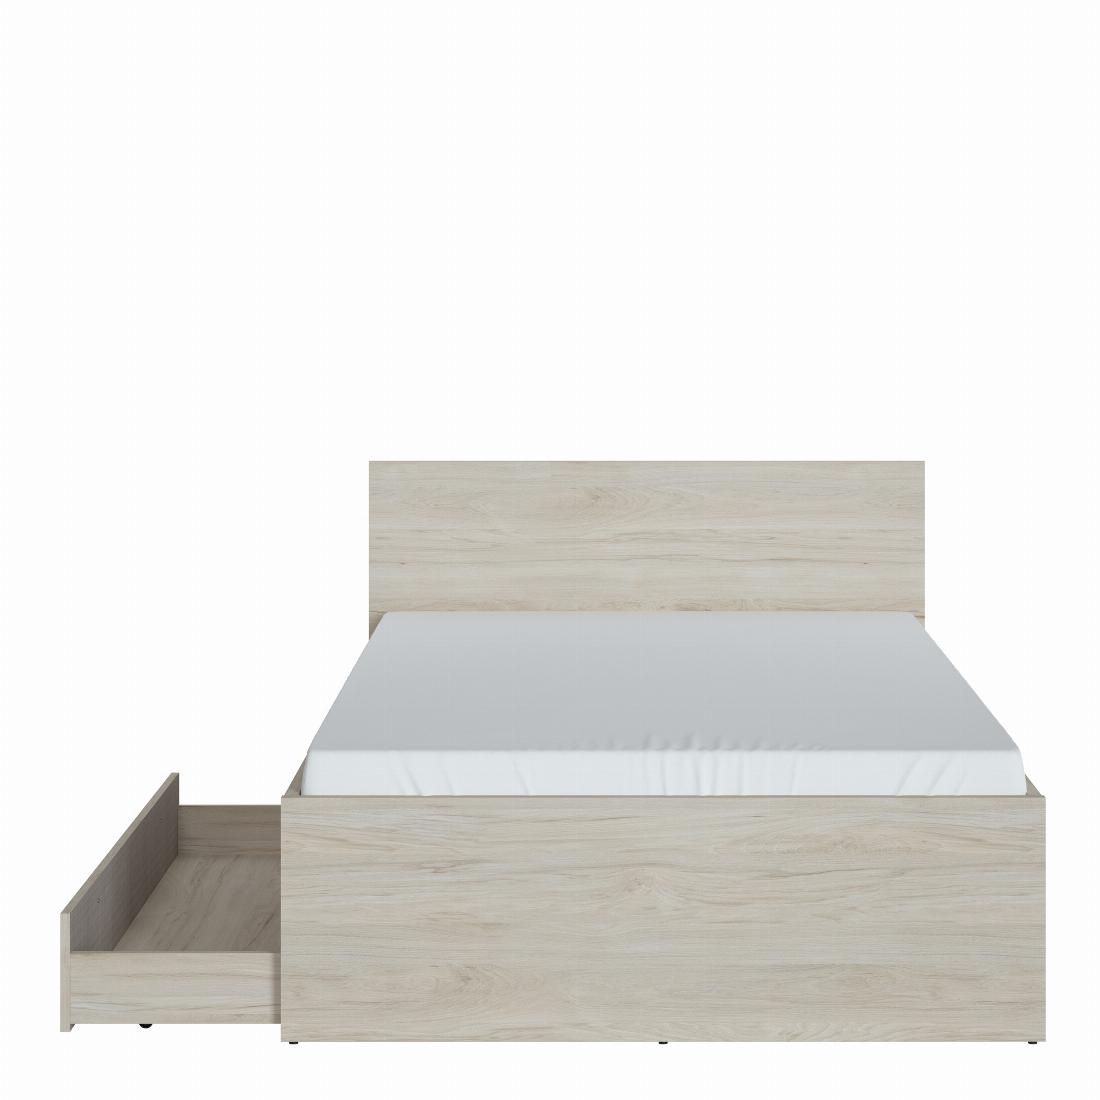 Denim 120cm Bed with 1 Drawer in Light Walnut, Grey Fabric Effect and Cashmere